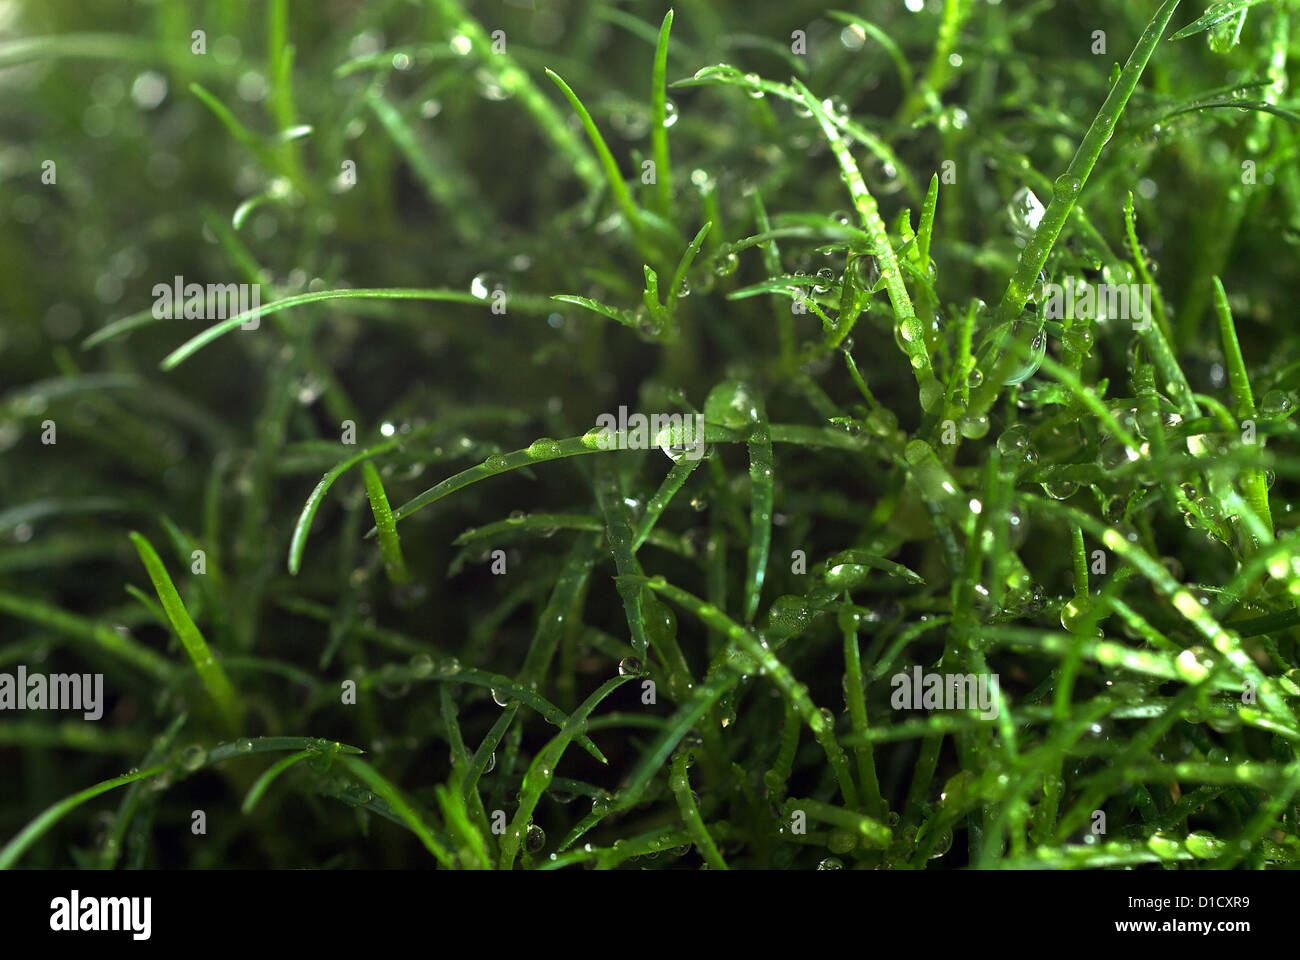 Berlin, Germany, grass covered with raindrops Stock Photo